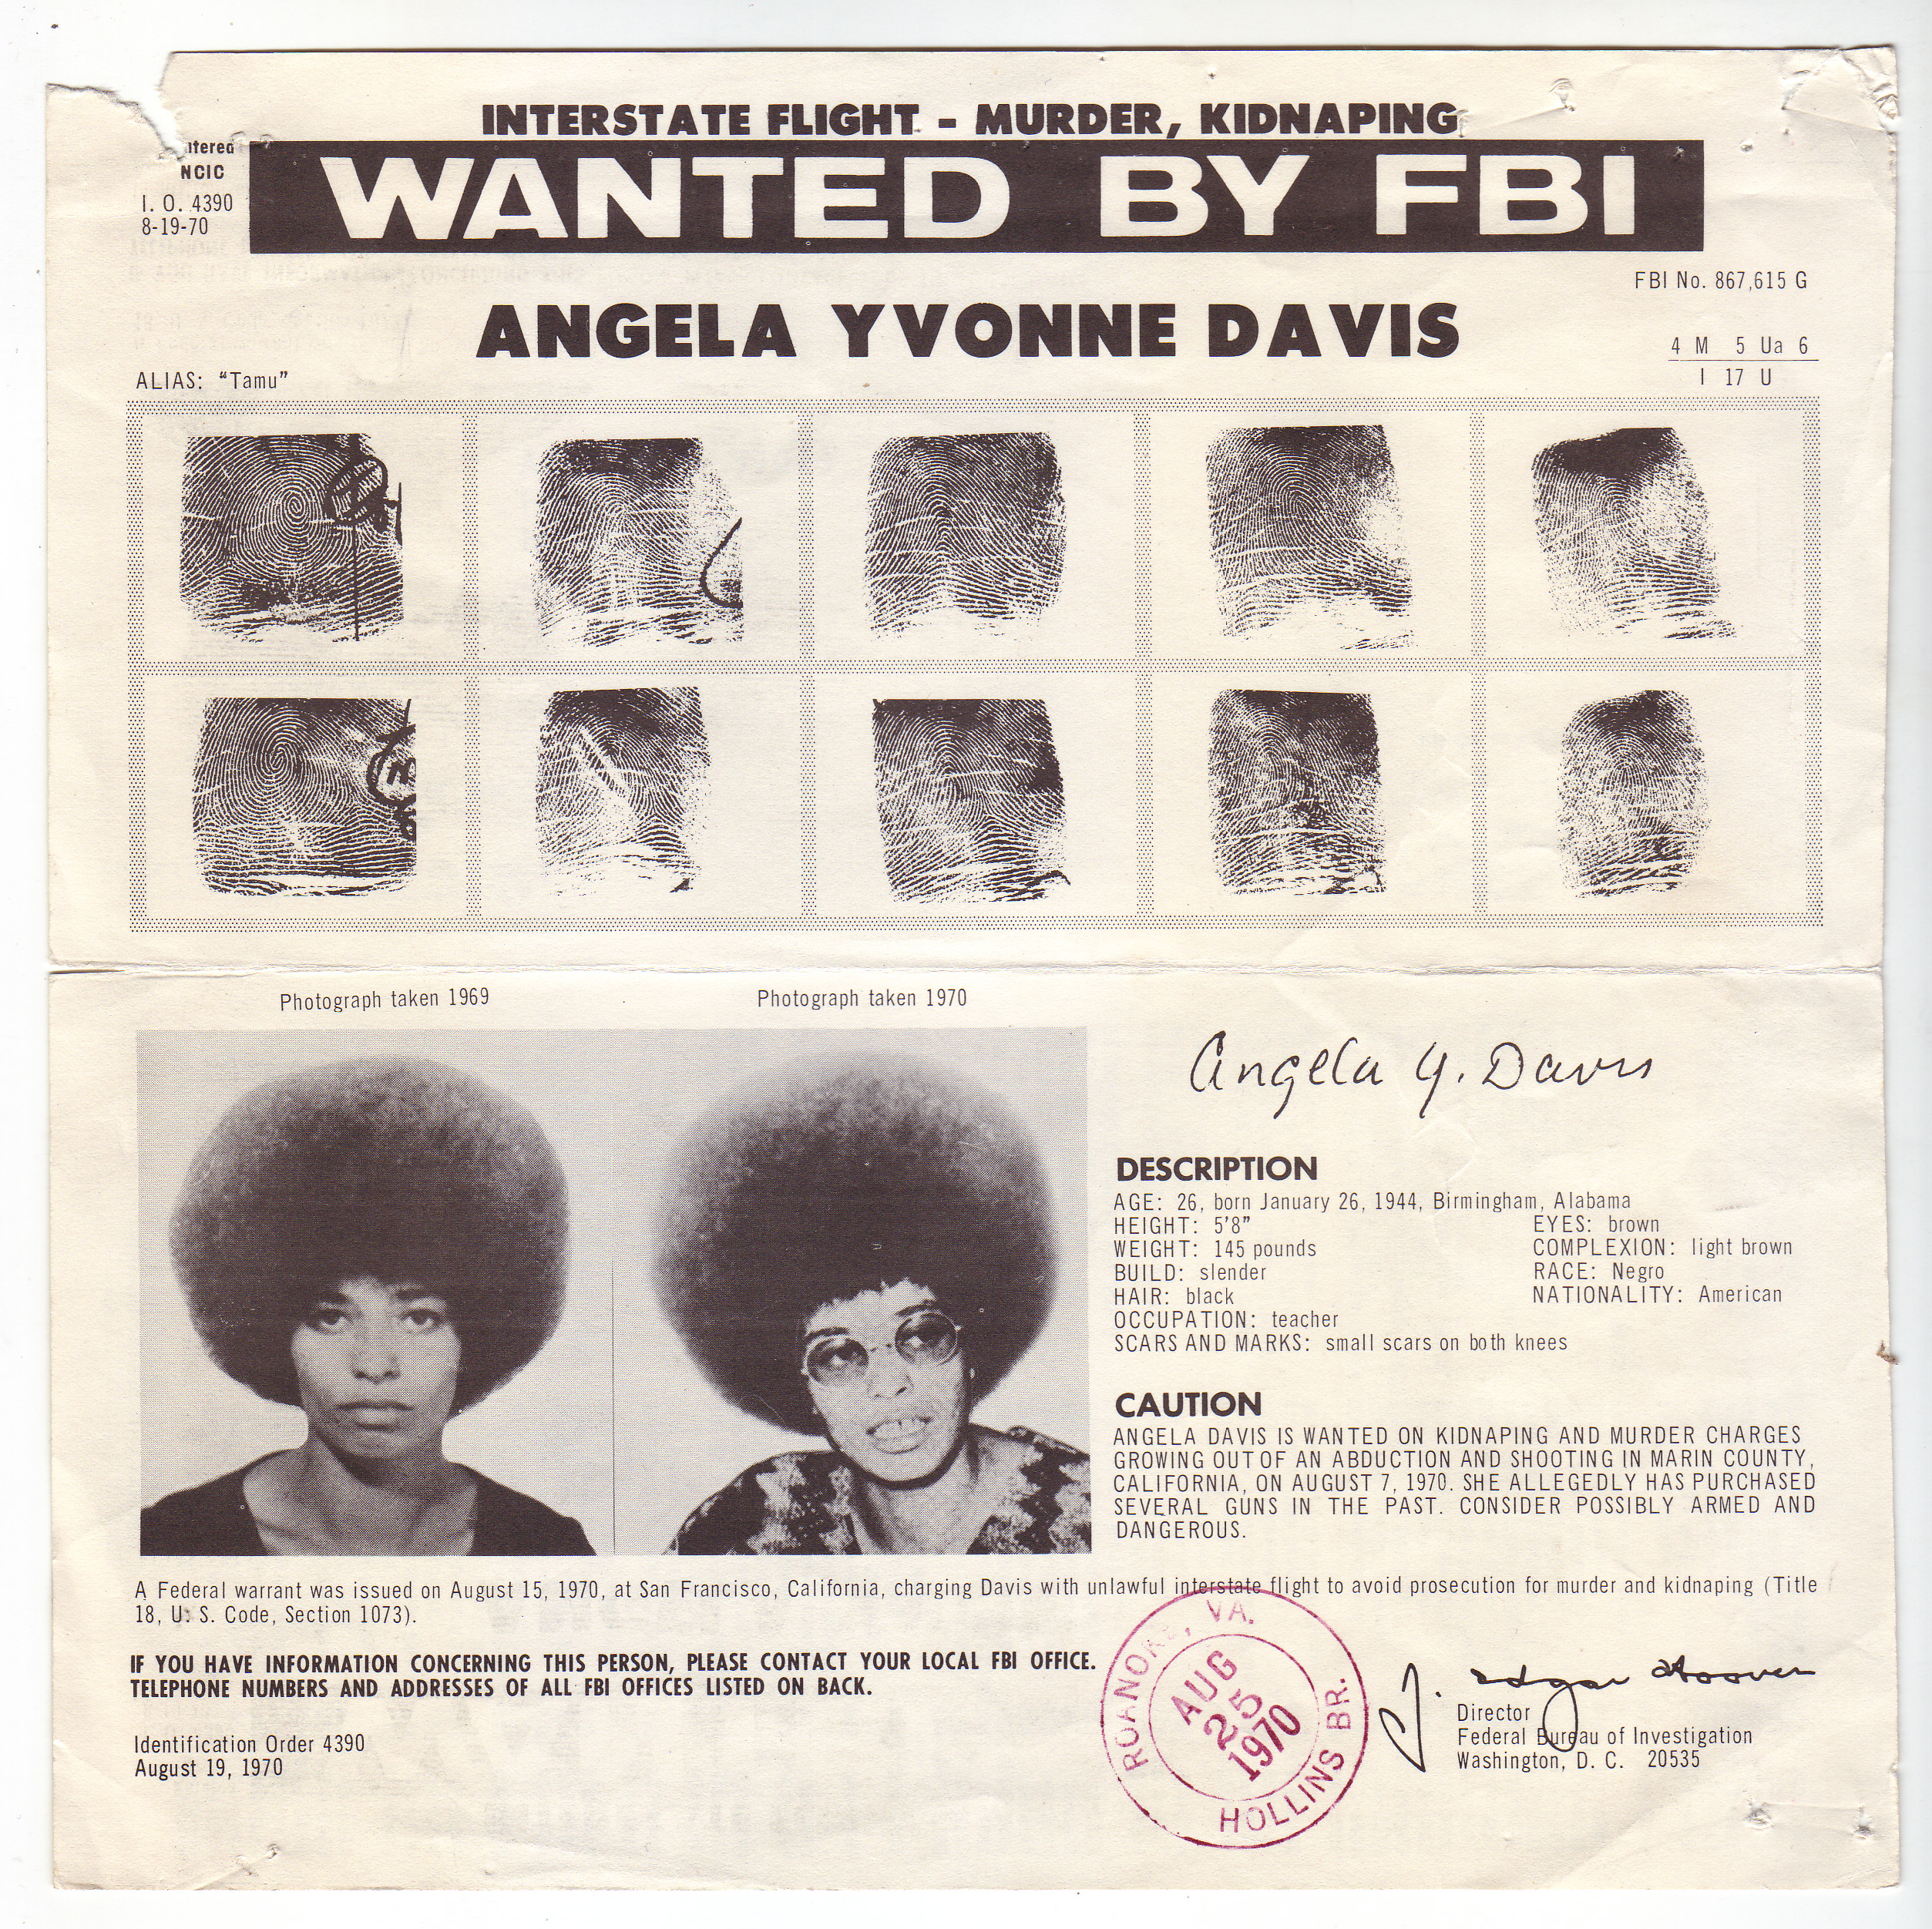 Black and white image of wanted poster with fingerprints and pictures